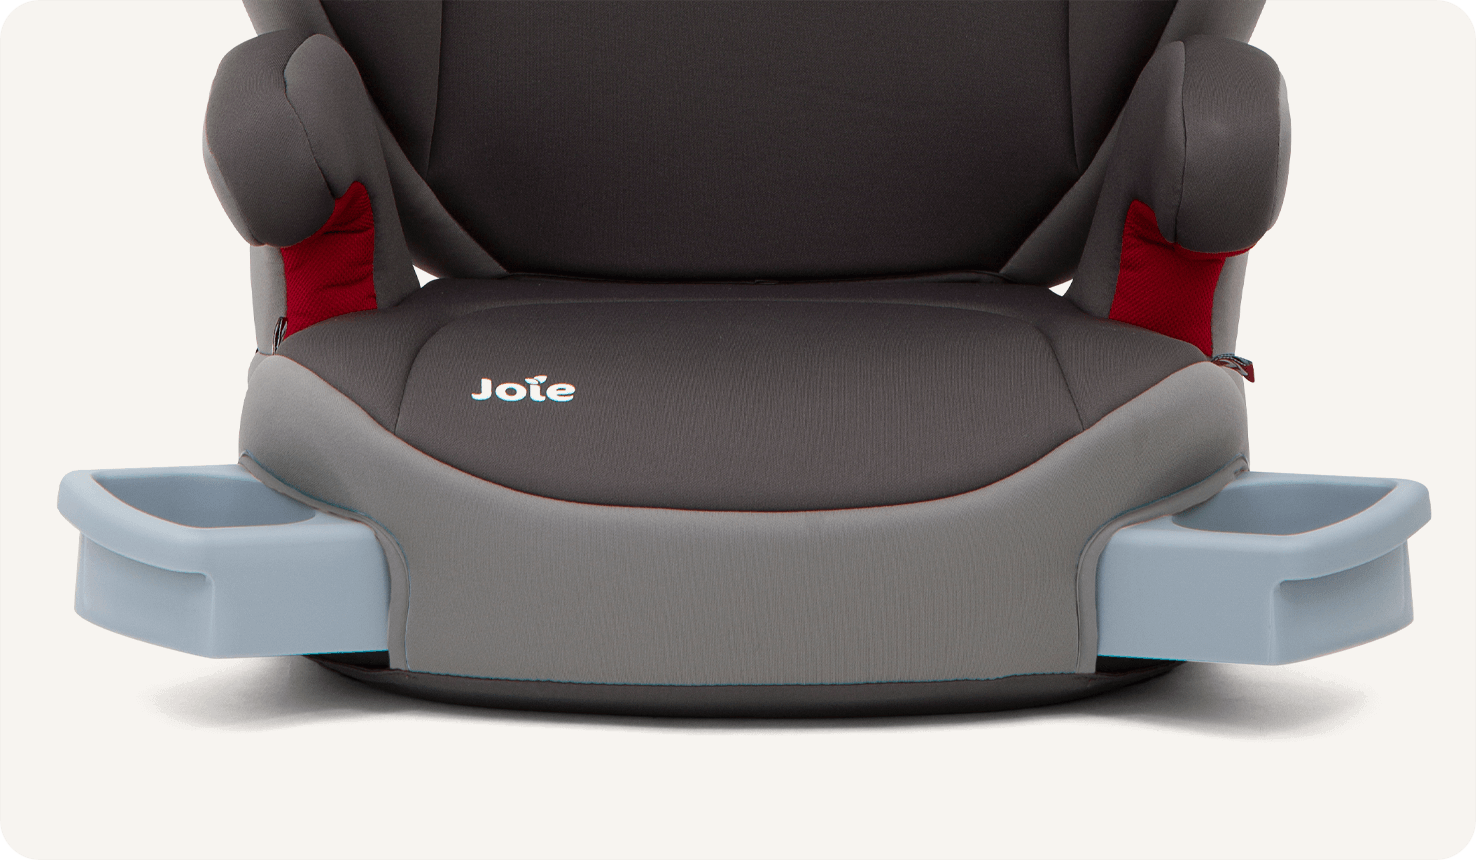  Zoomed in view of the cupholders on the Joie trillo booster seat.